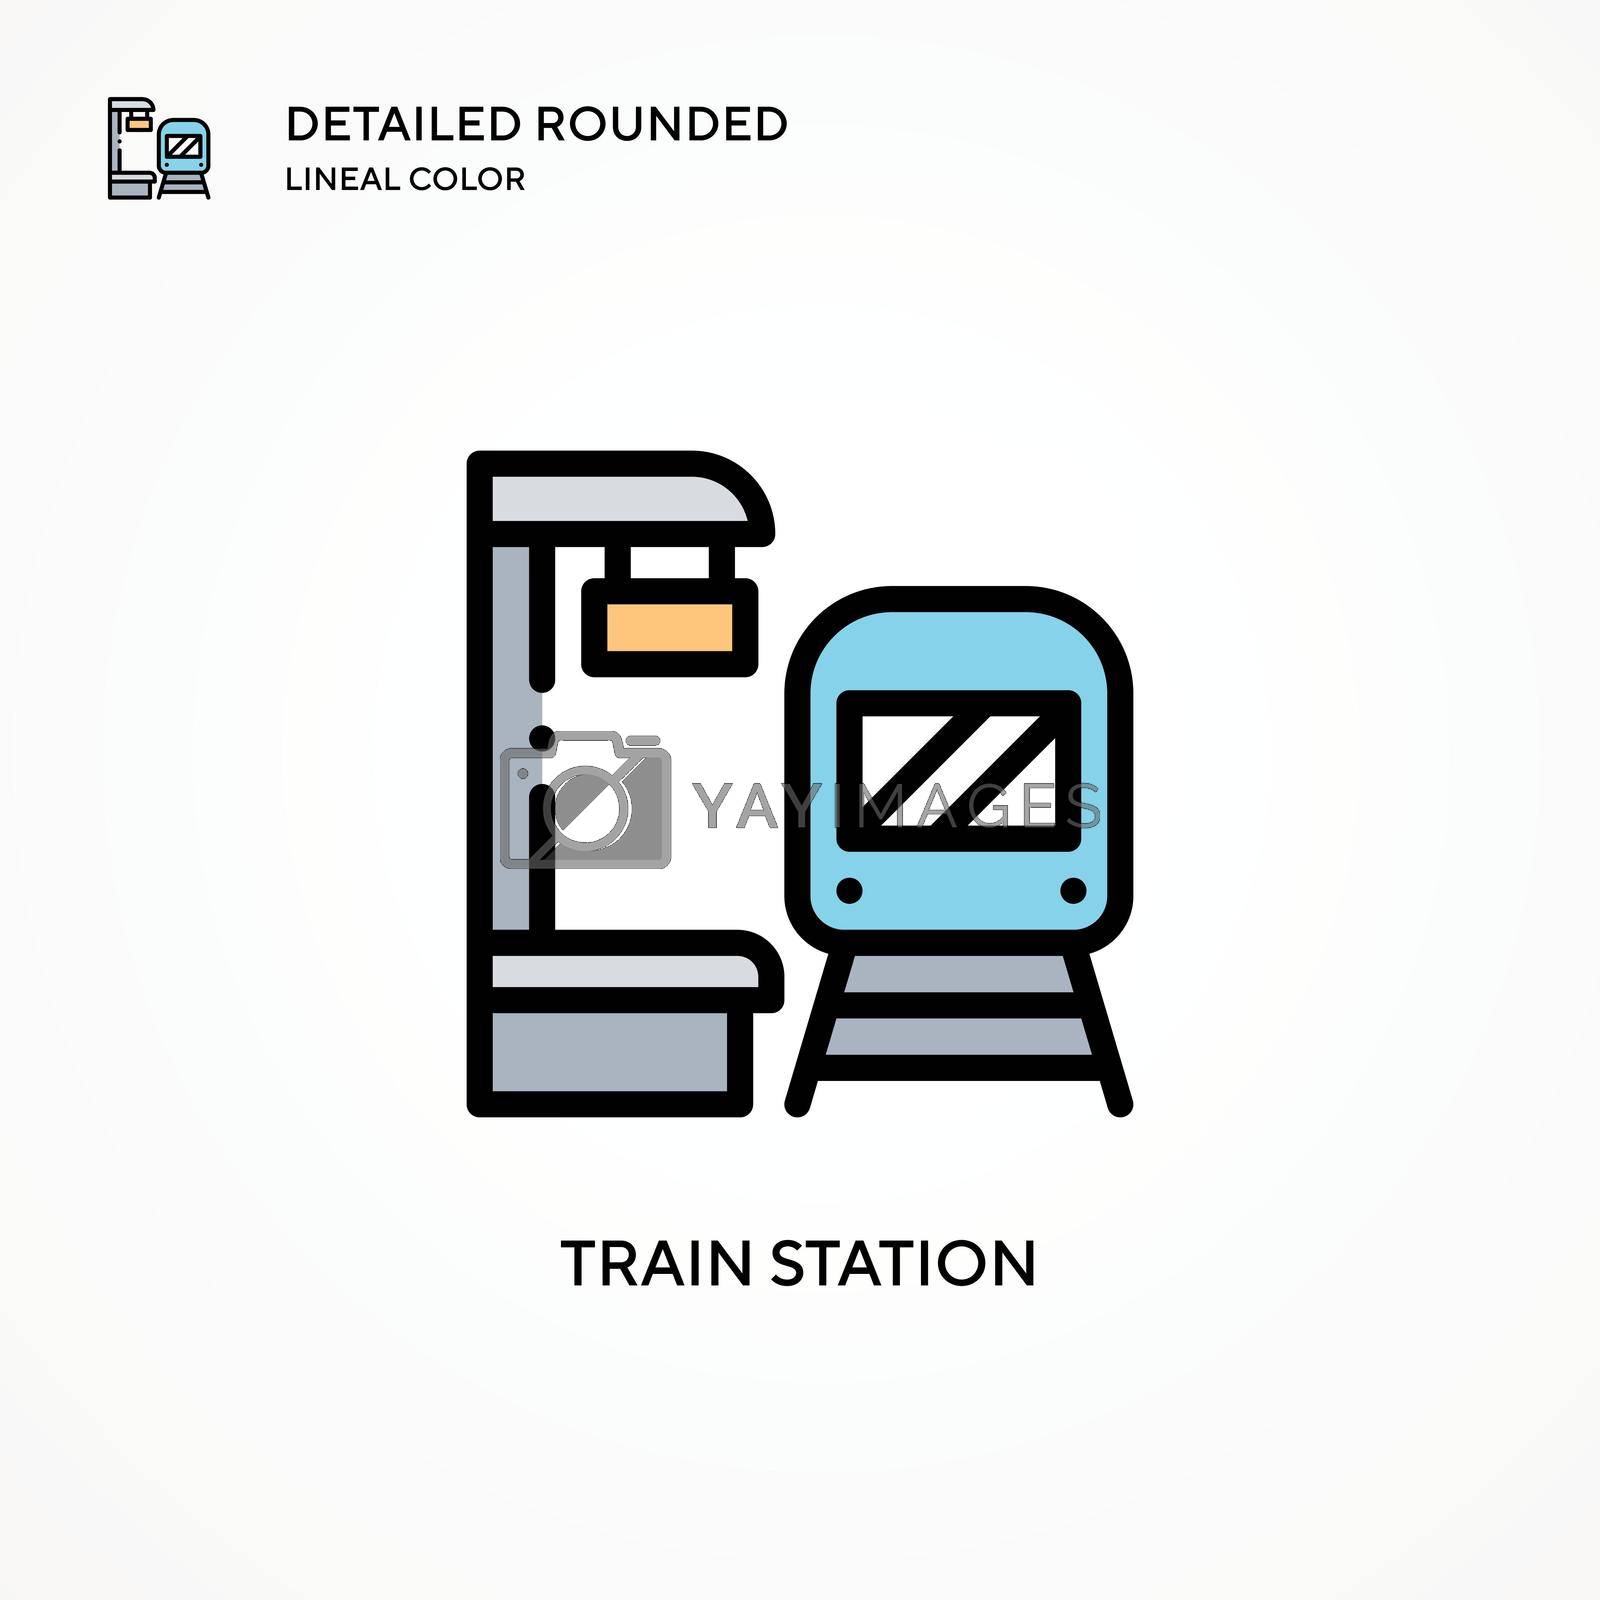 Train station vector icon. Modern vector illustration concepts. Easy to edit and customize.